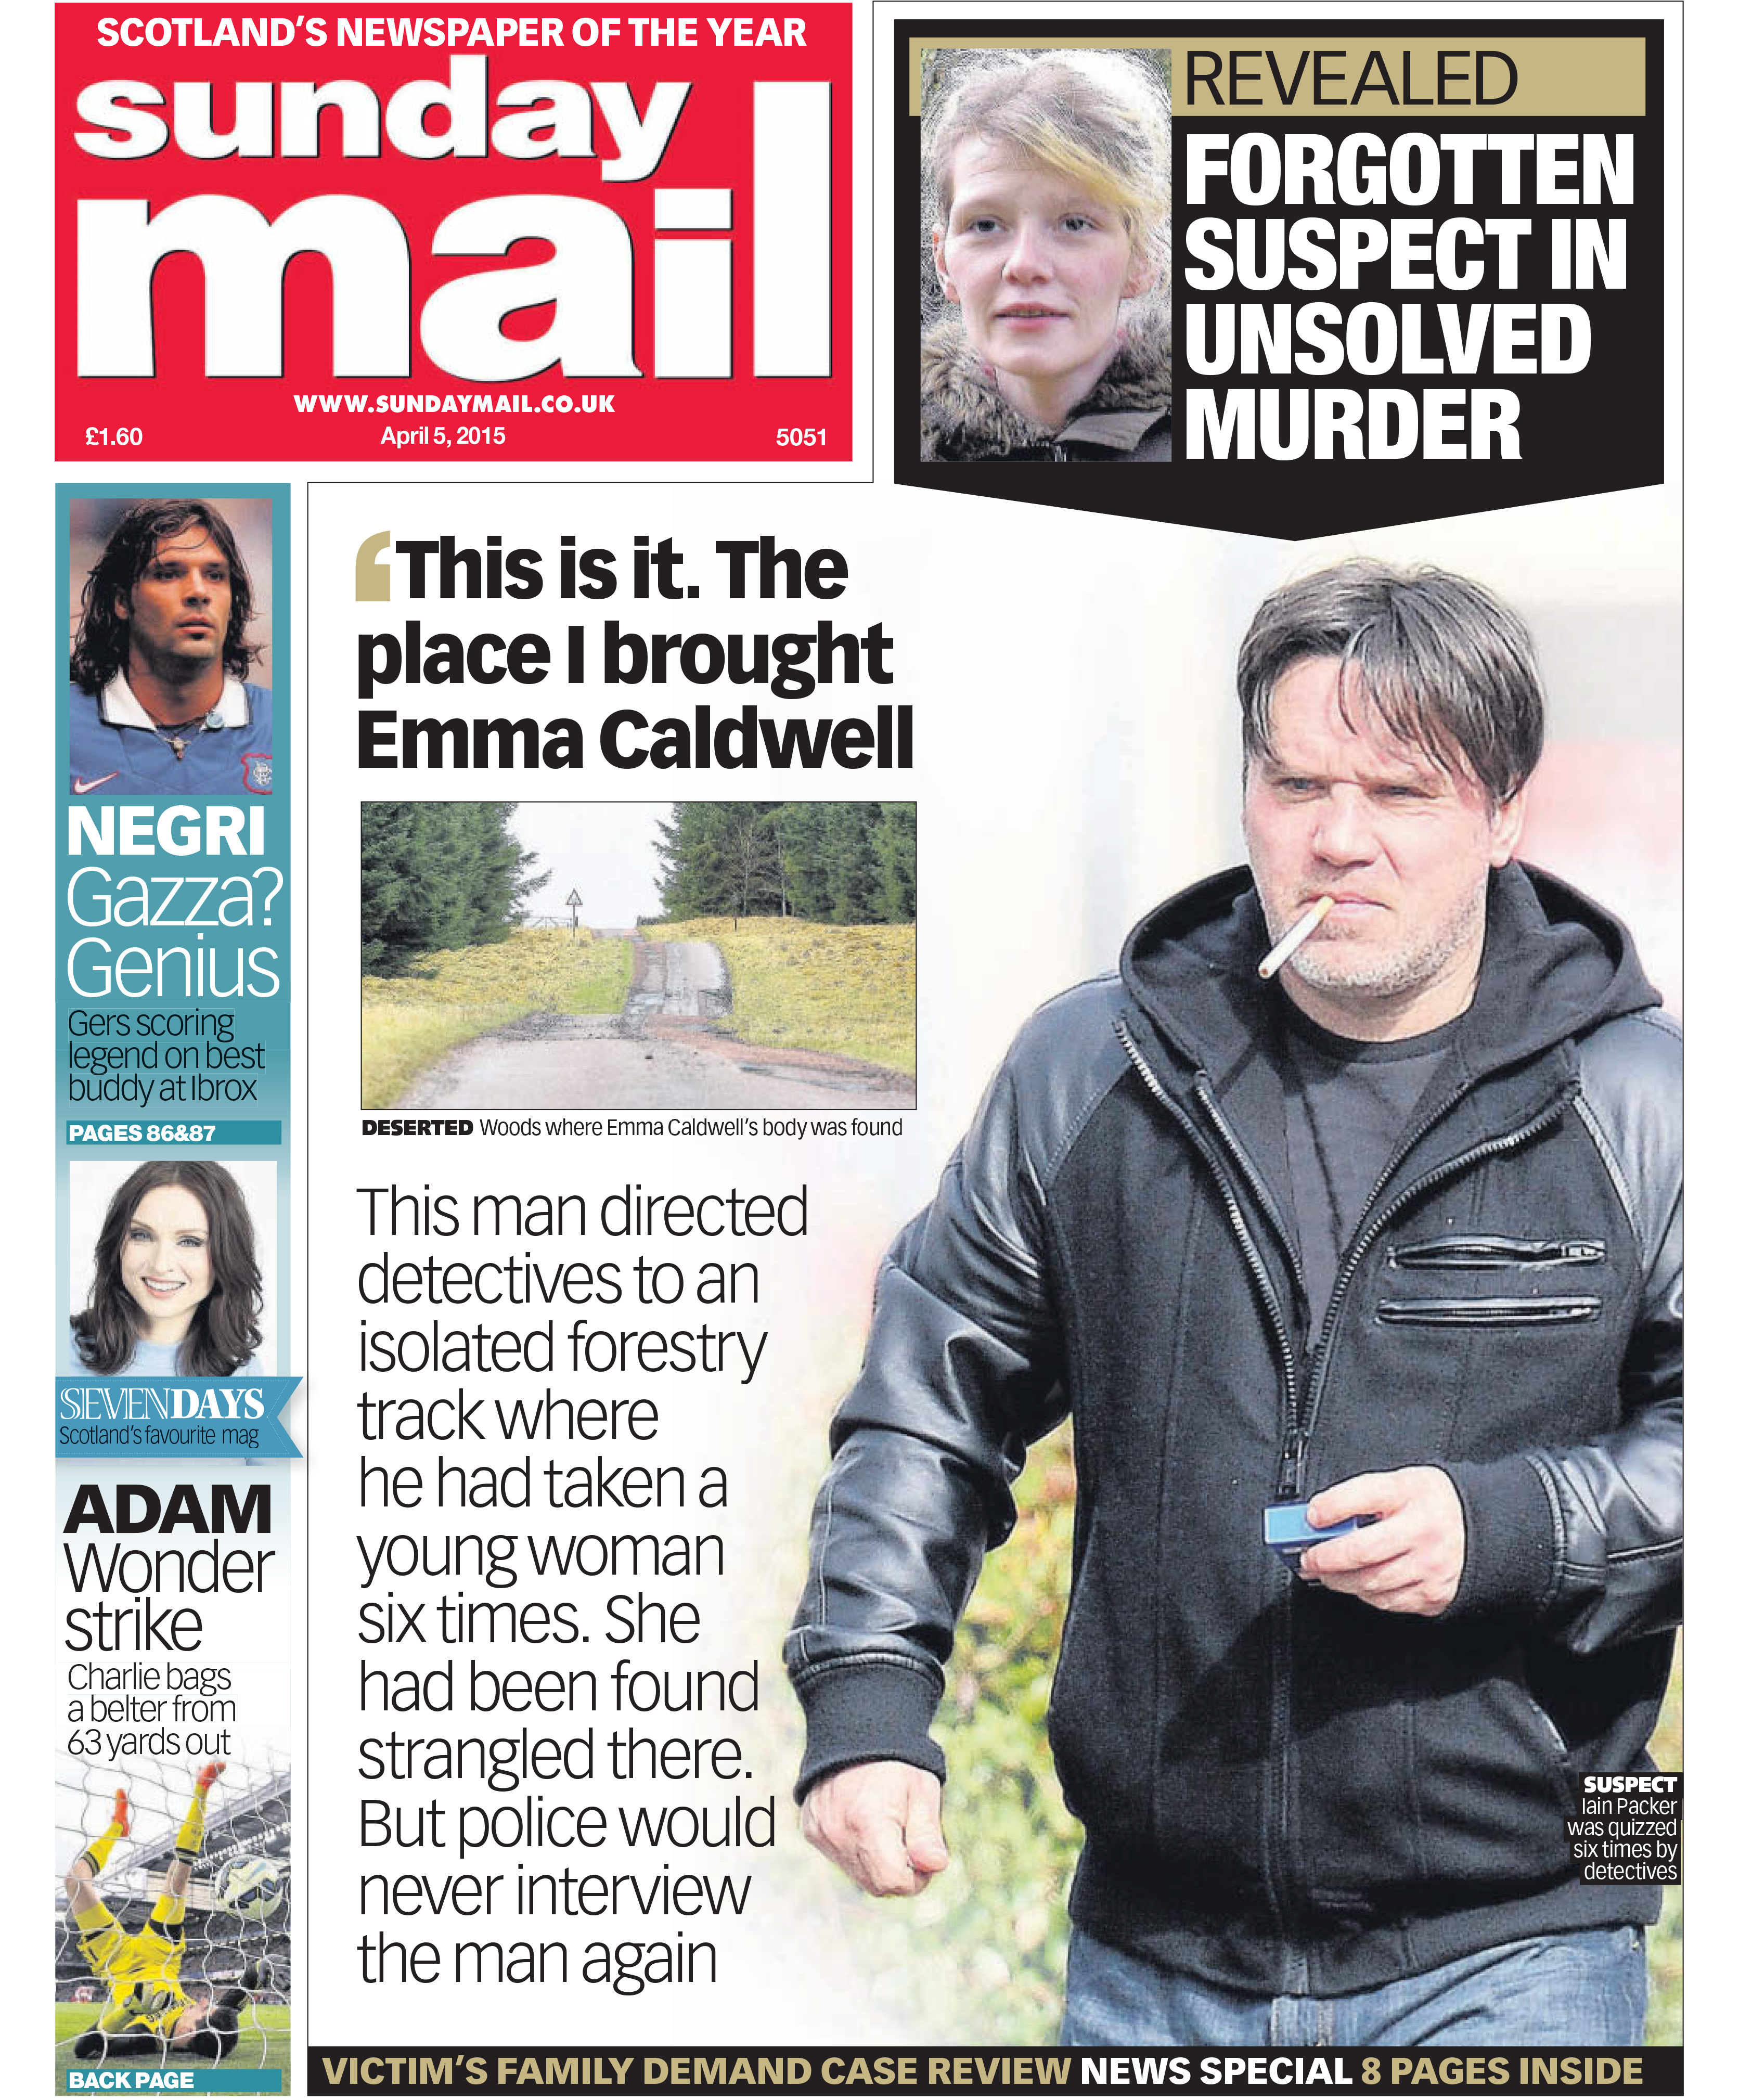 Sunday Mail front page, April 5, 2015.